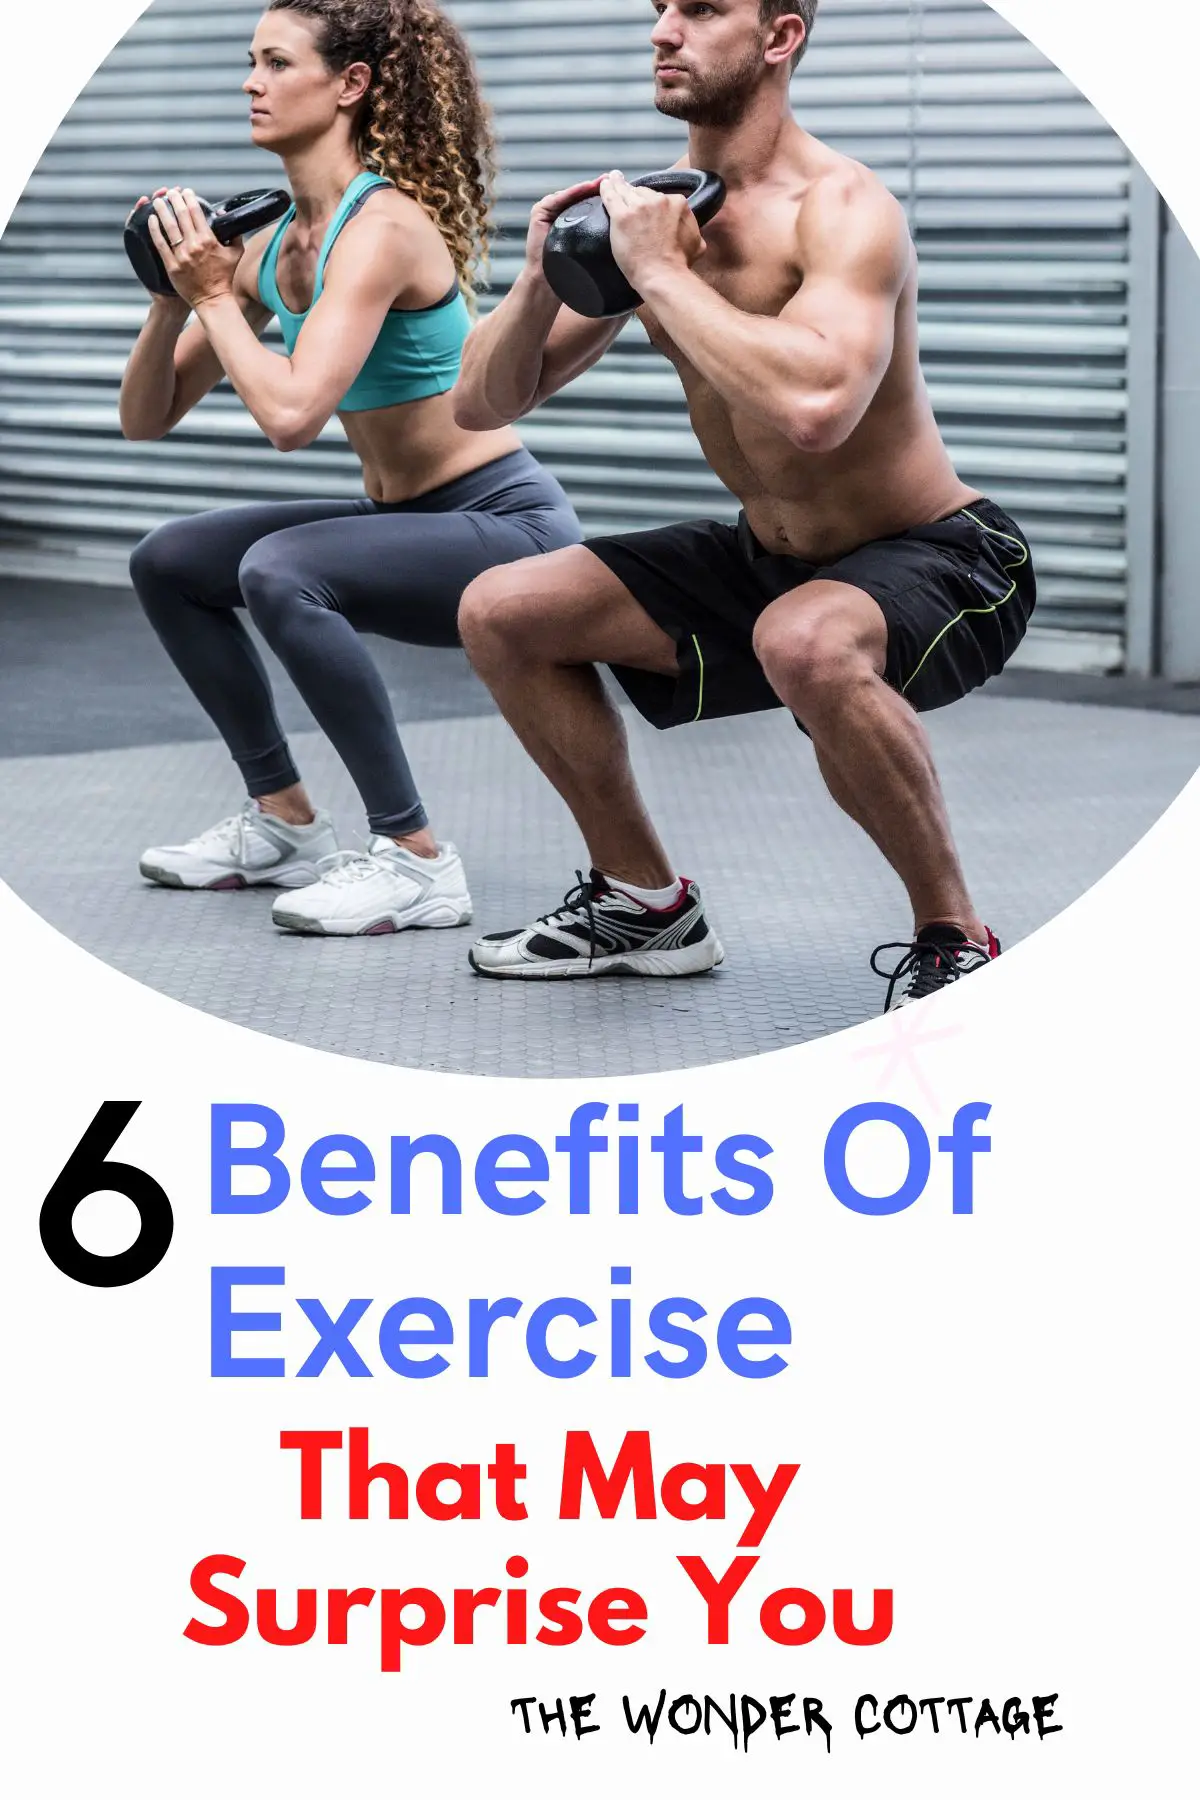 6 Benefits Of Exercise That May Surprise You